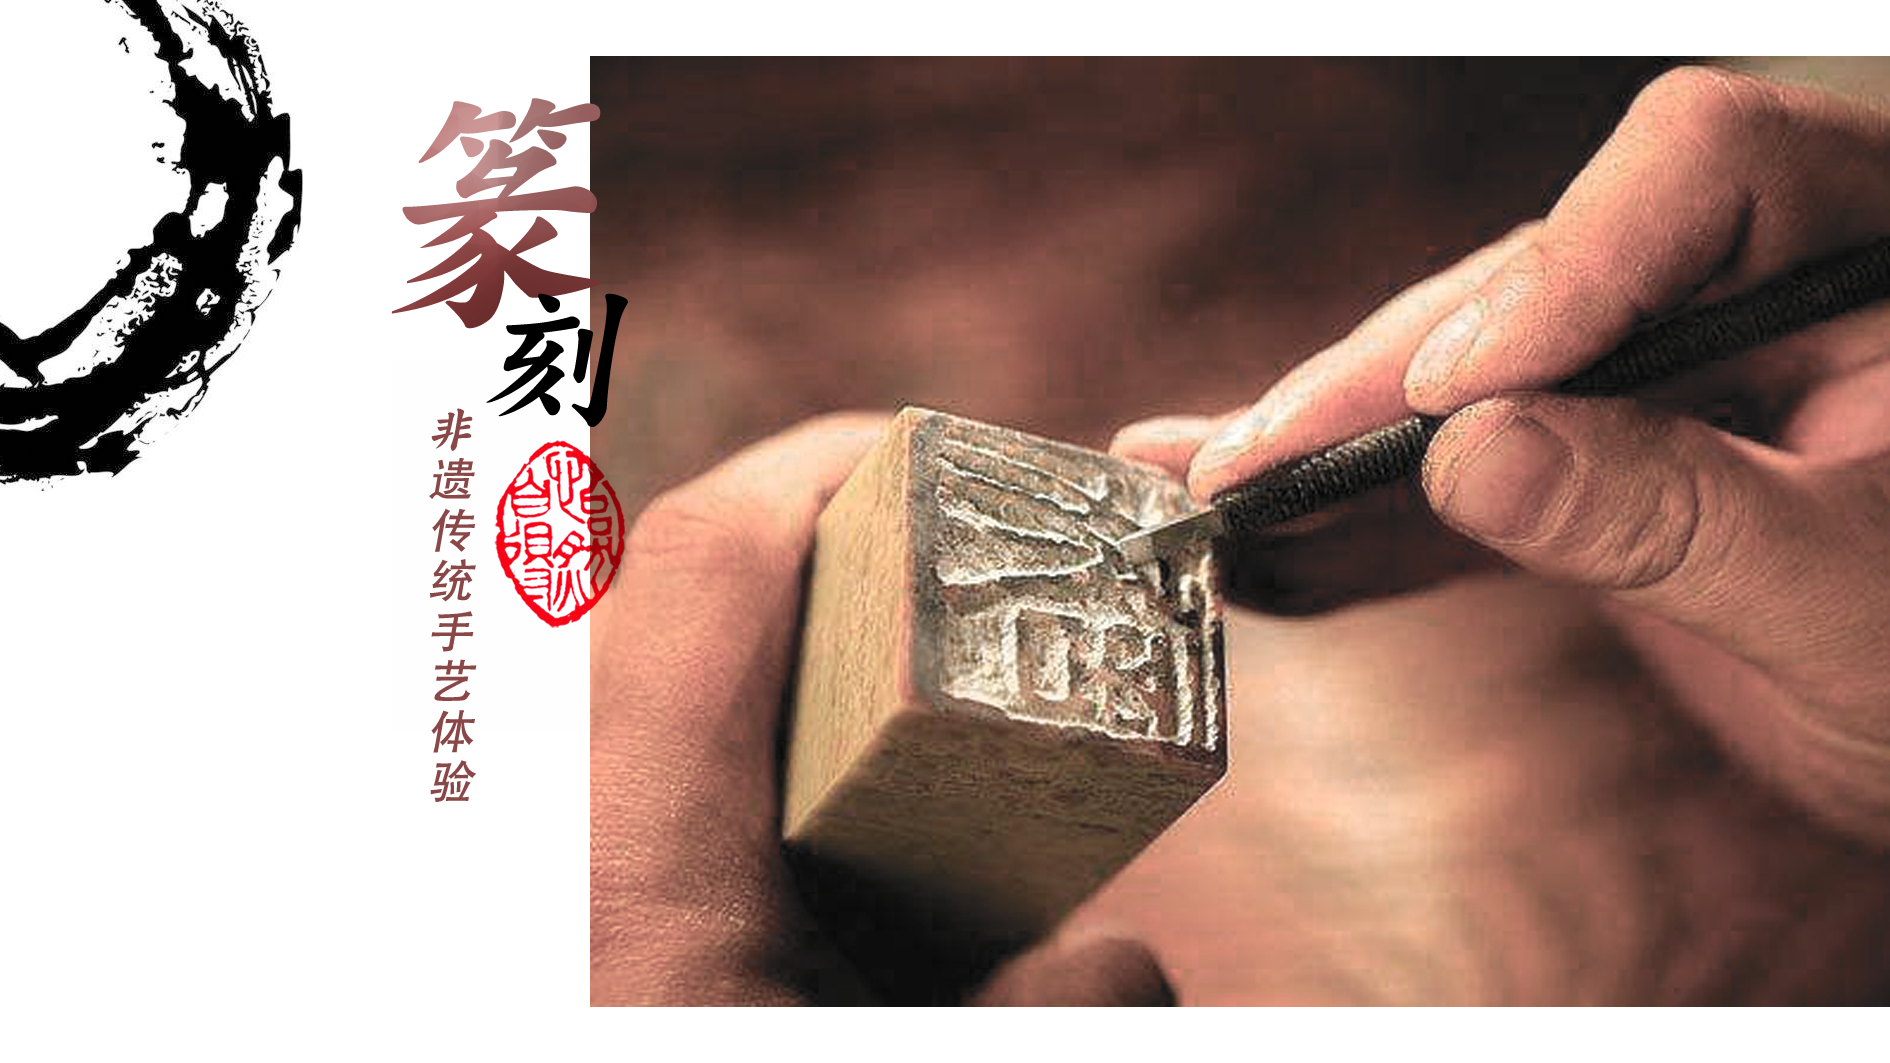 Intangible cultural heritage traditional crafts: Seal Cutting